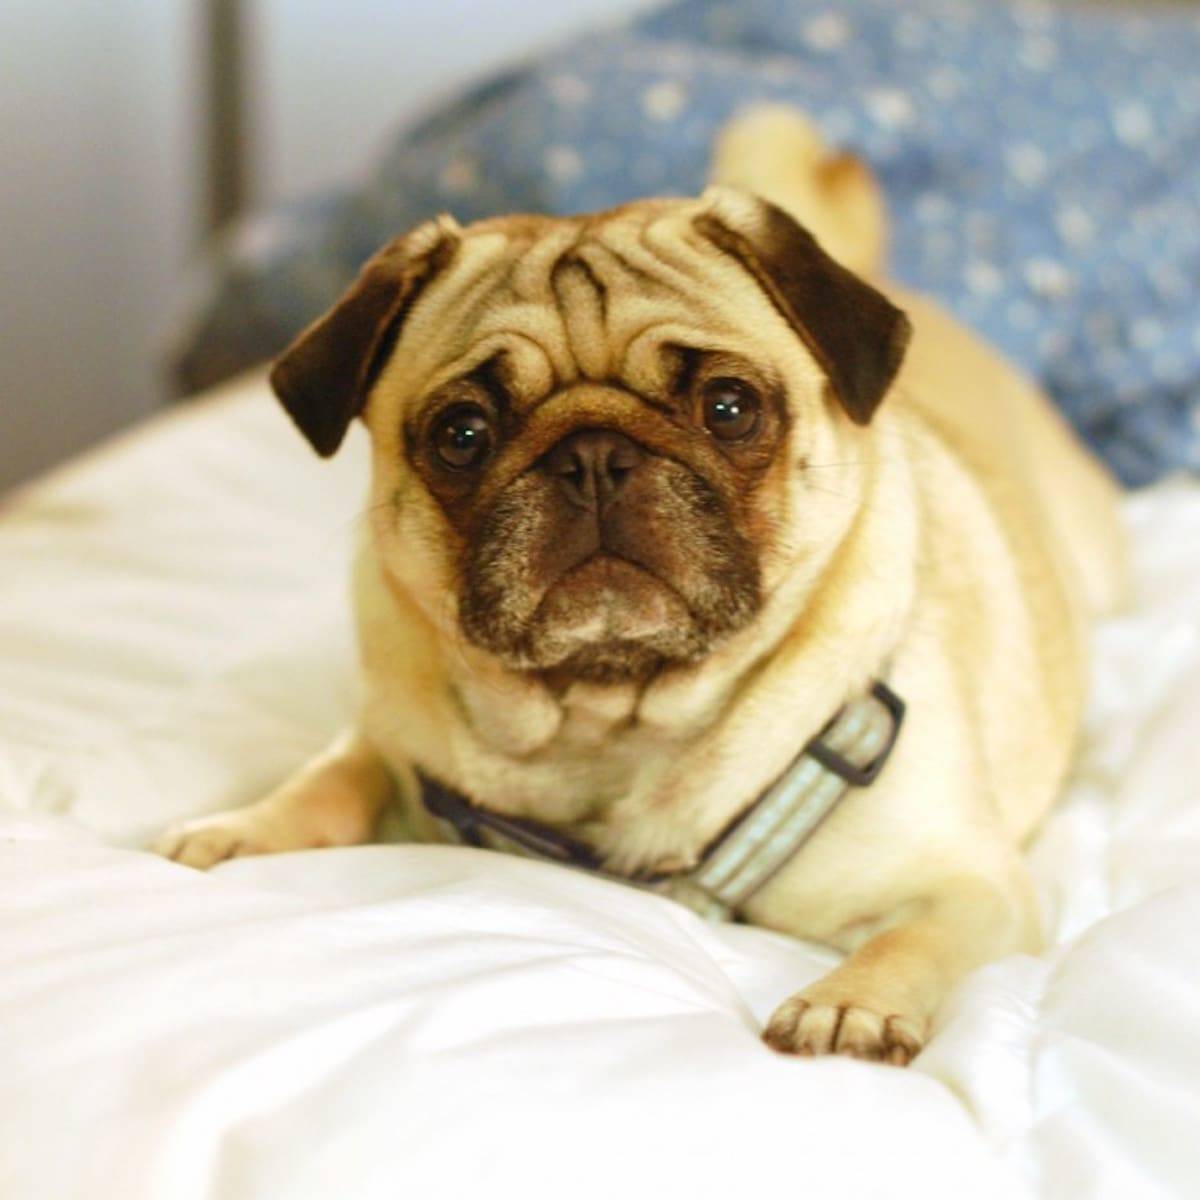 Pug laying on a bed.